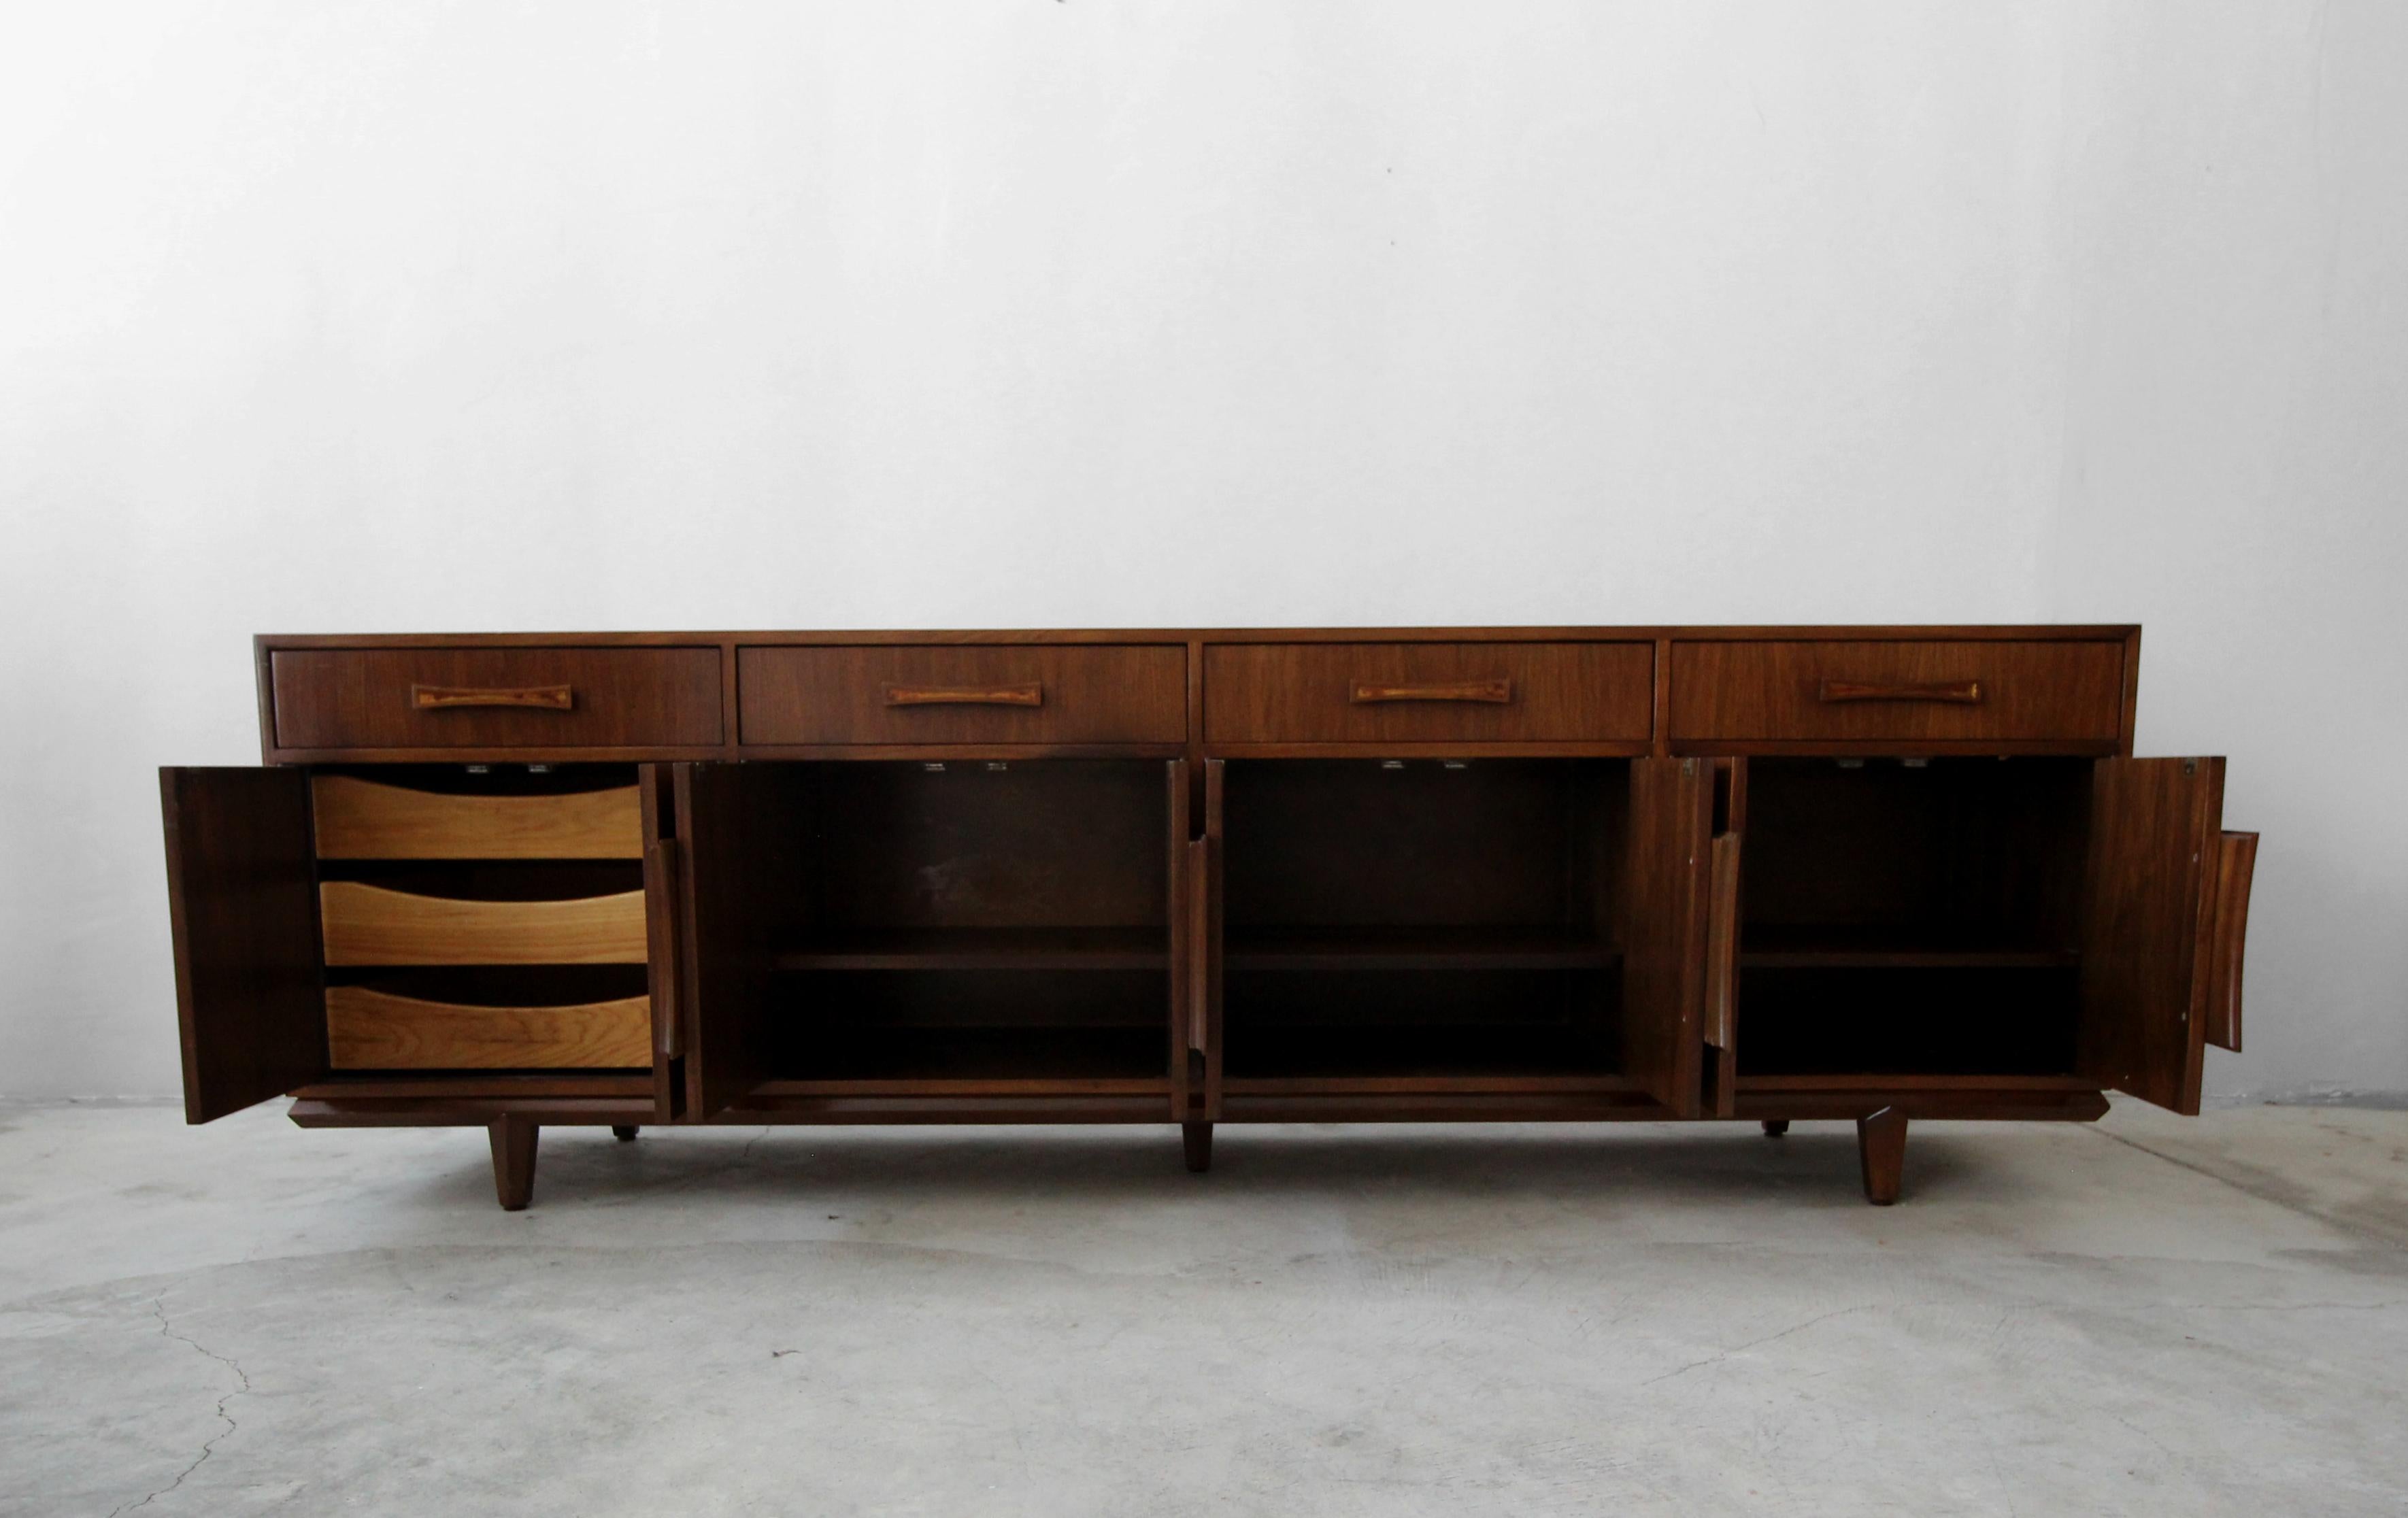 20th Century Monumental Midcentury Walnut Credenza with Inlay Handles by Cal Mode Furniture